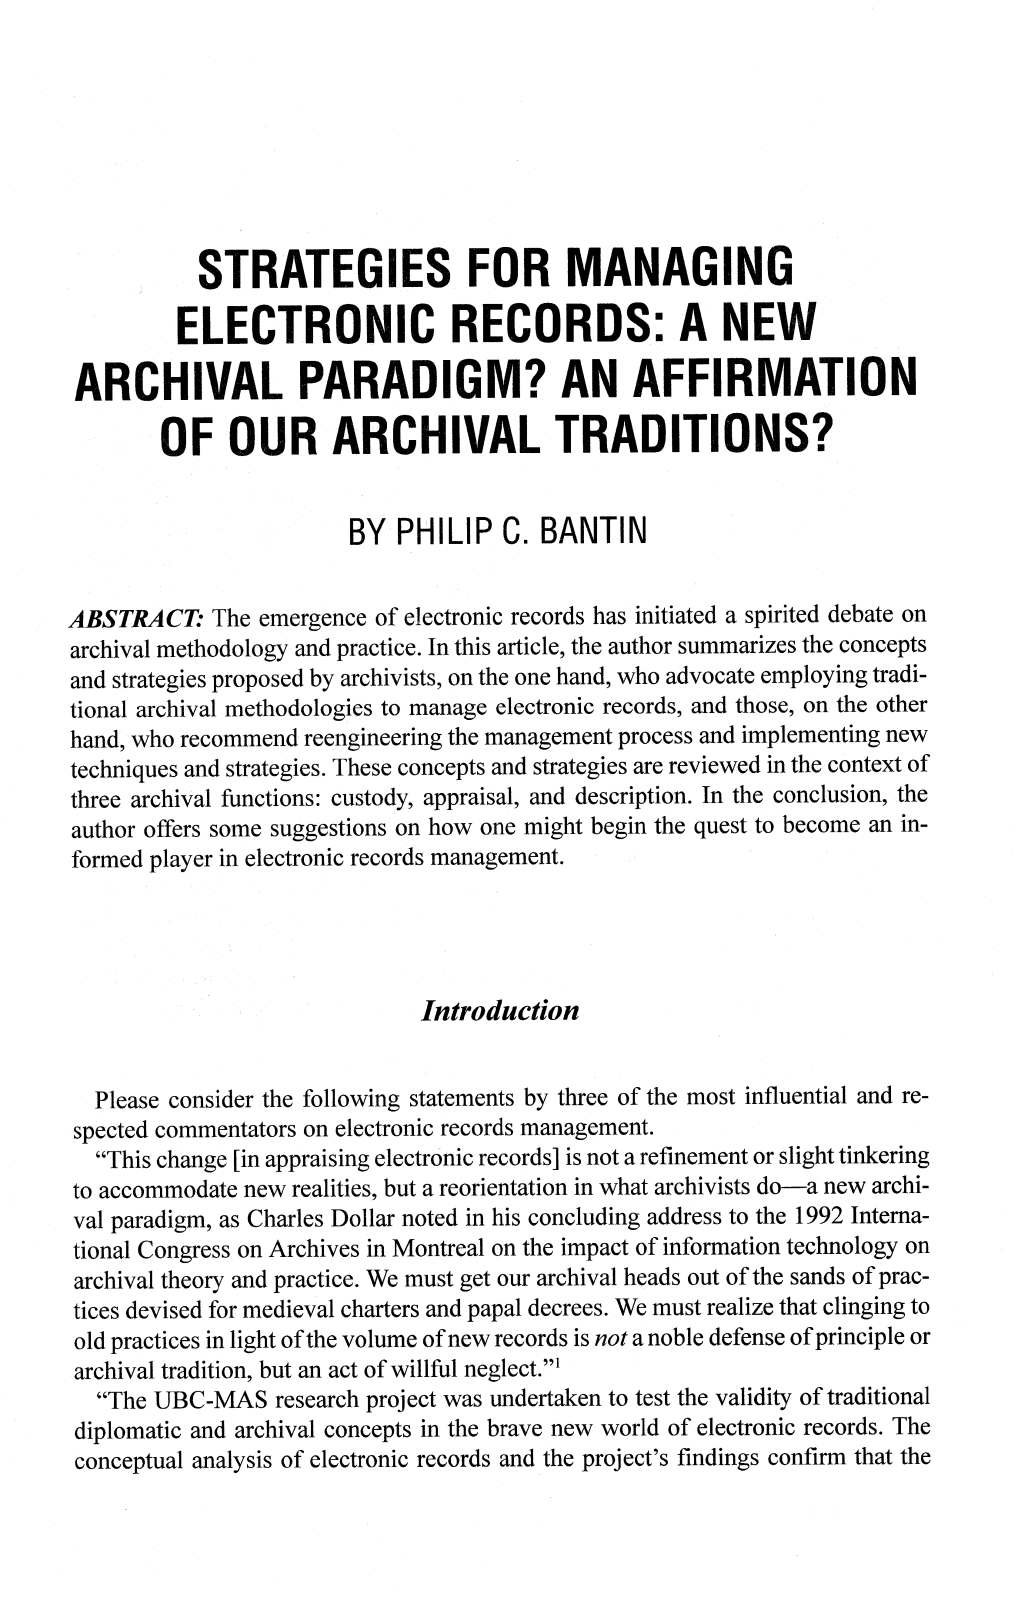 Strategies for Managing Electronic Records: a New Archival Paradigm? an Affirmation of Our Archival Traditions?